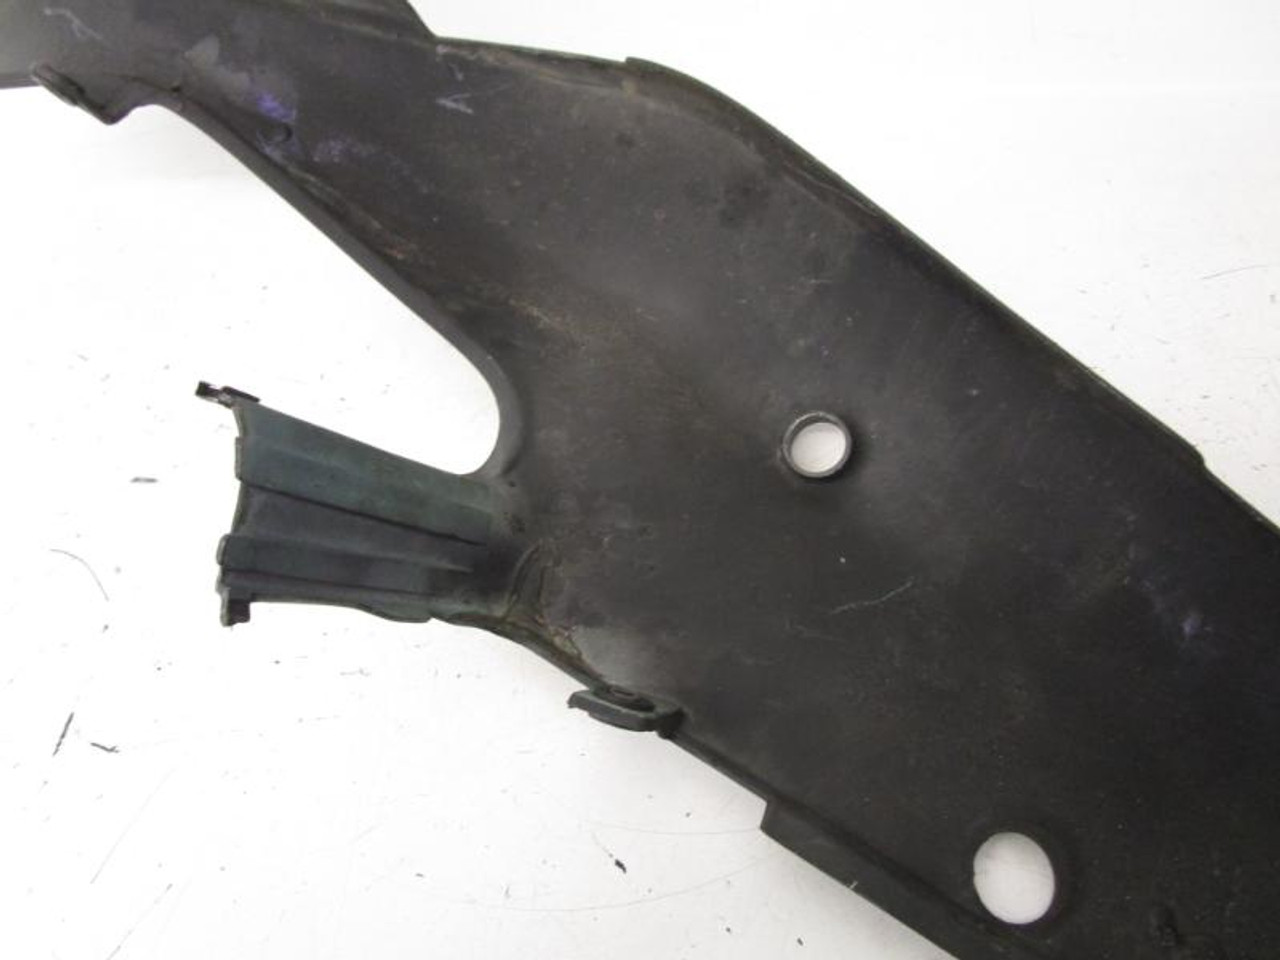 97 Kawasaki ZX7R P Left Side Cover Tail Plastic Cowl 36001-1557-H8 